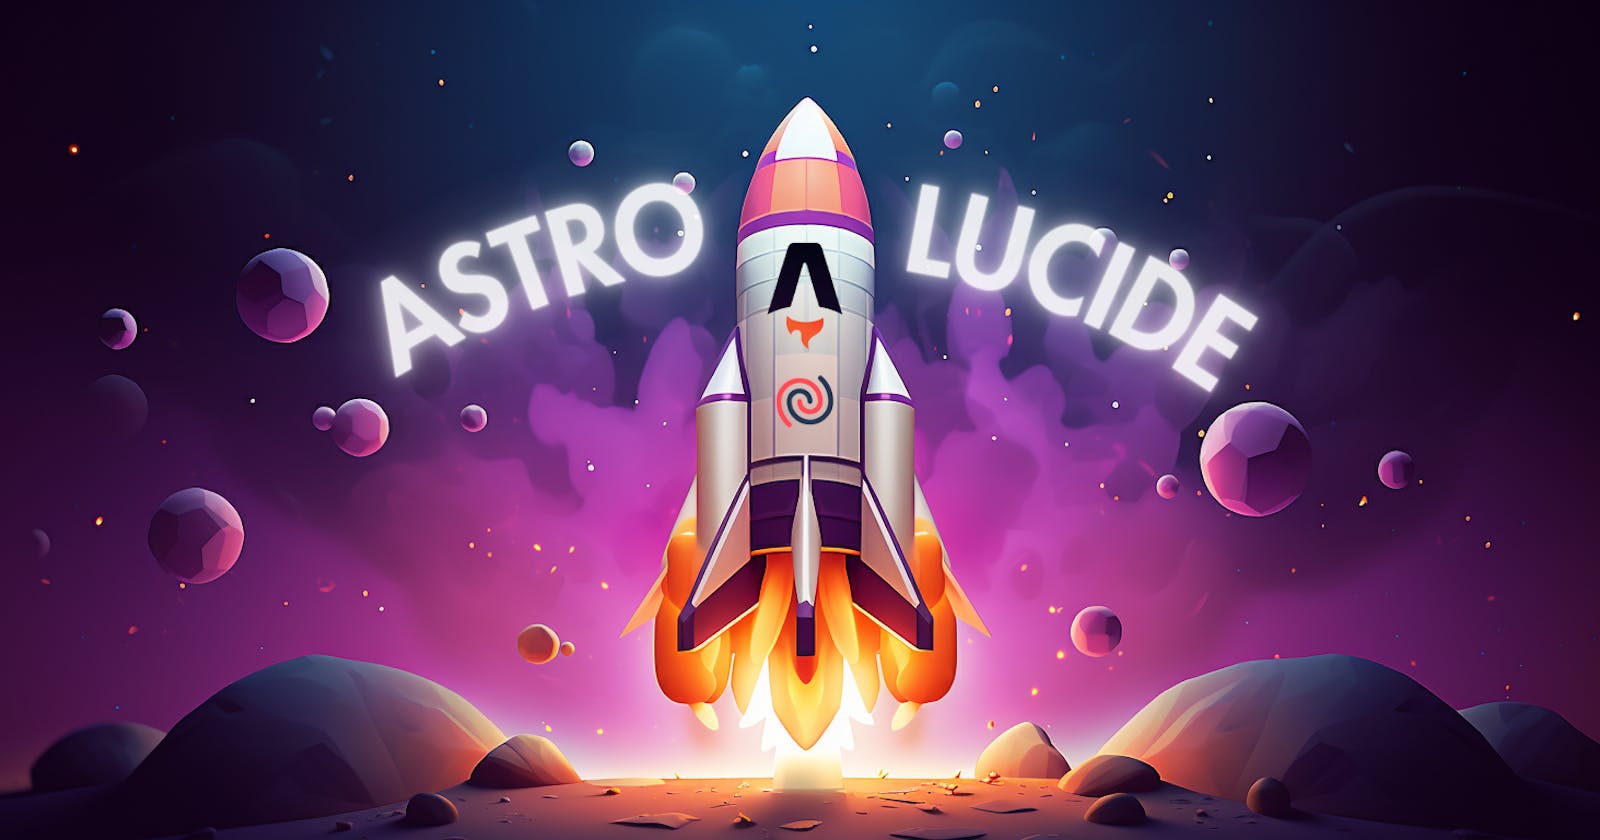 Add Lucide Icons to Astro